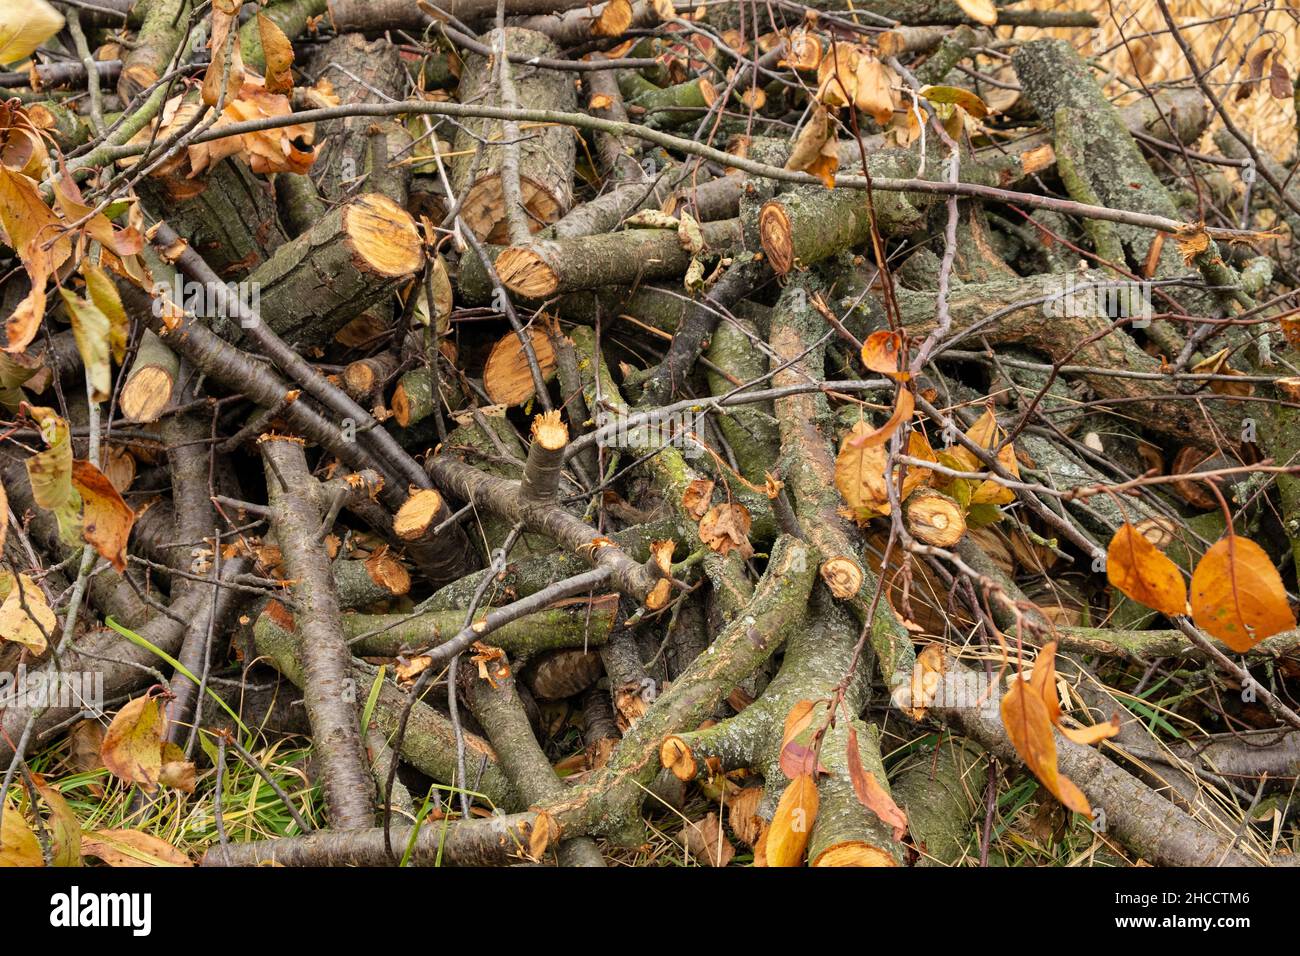 cut tree, chopped firewood stacked in a pile. Stock Photo